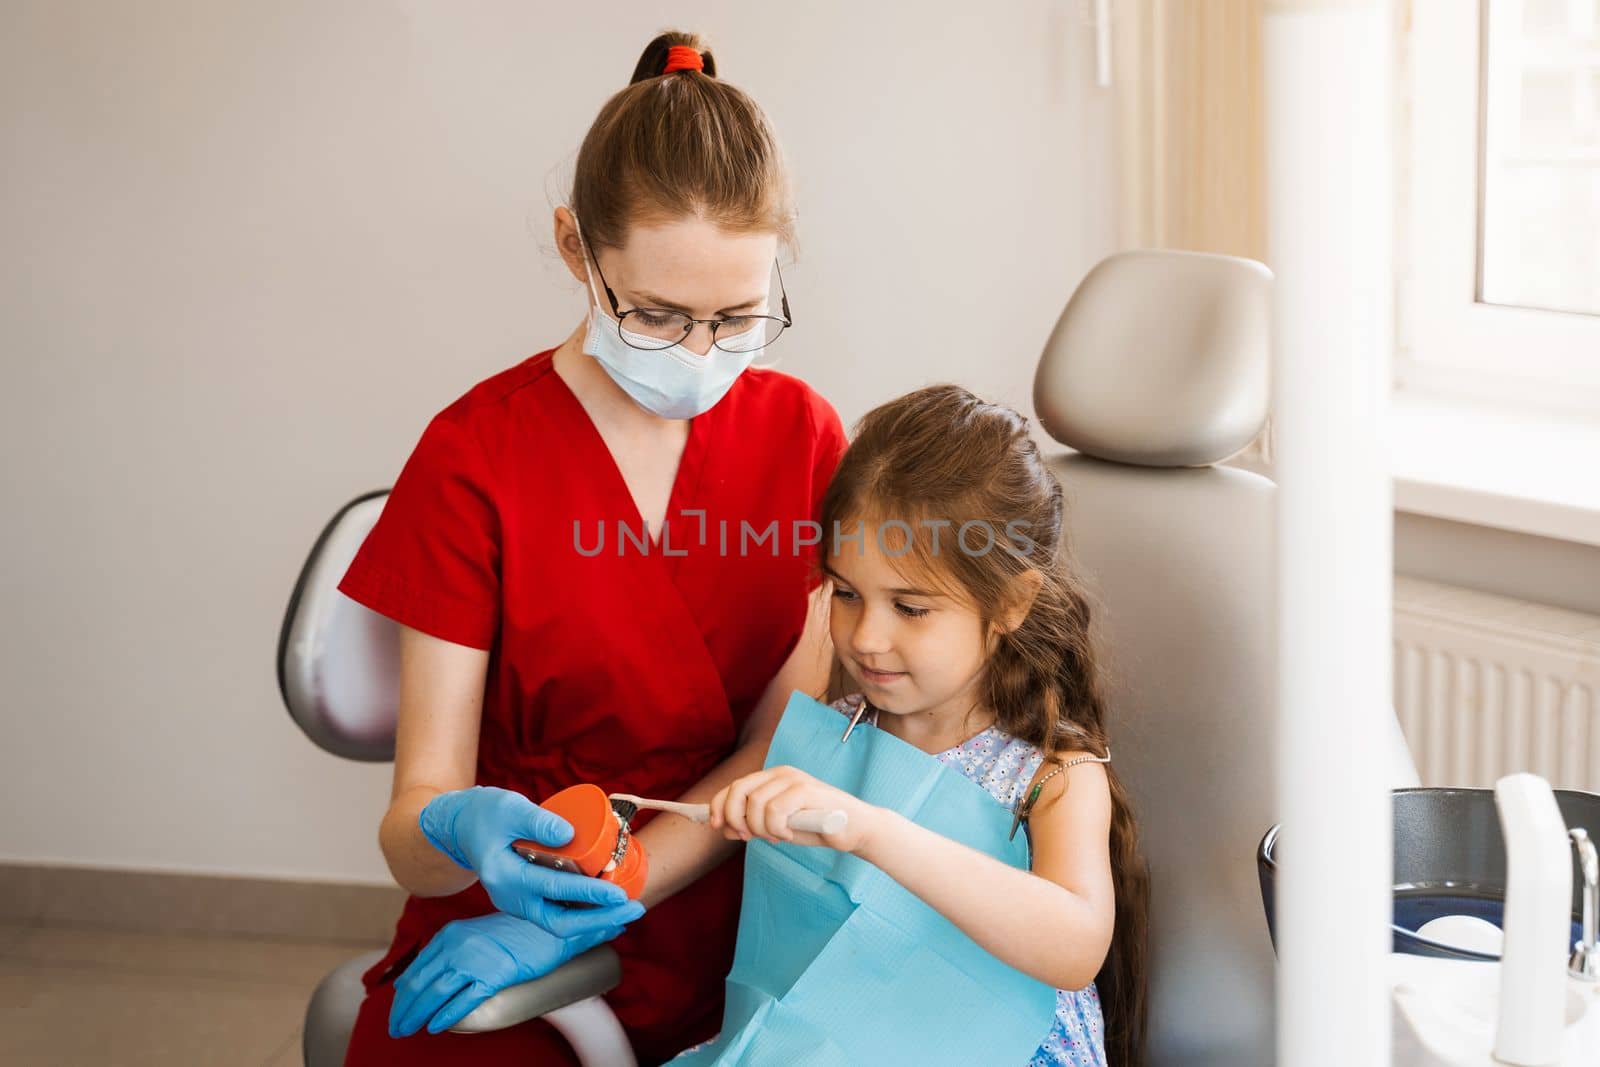 Pediatric dentist teaching oral hygiene lesson for kids in dentistry. The dentist shows child how to properly use toothbrush for brush teeth. Jaw anatomical model teeth brushing. by Rabizo